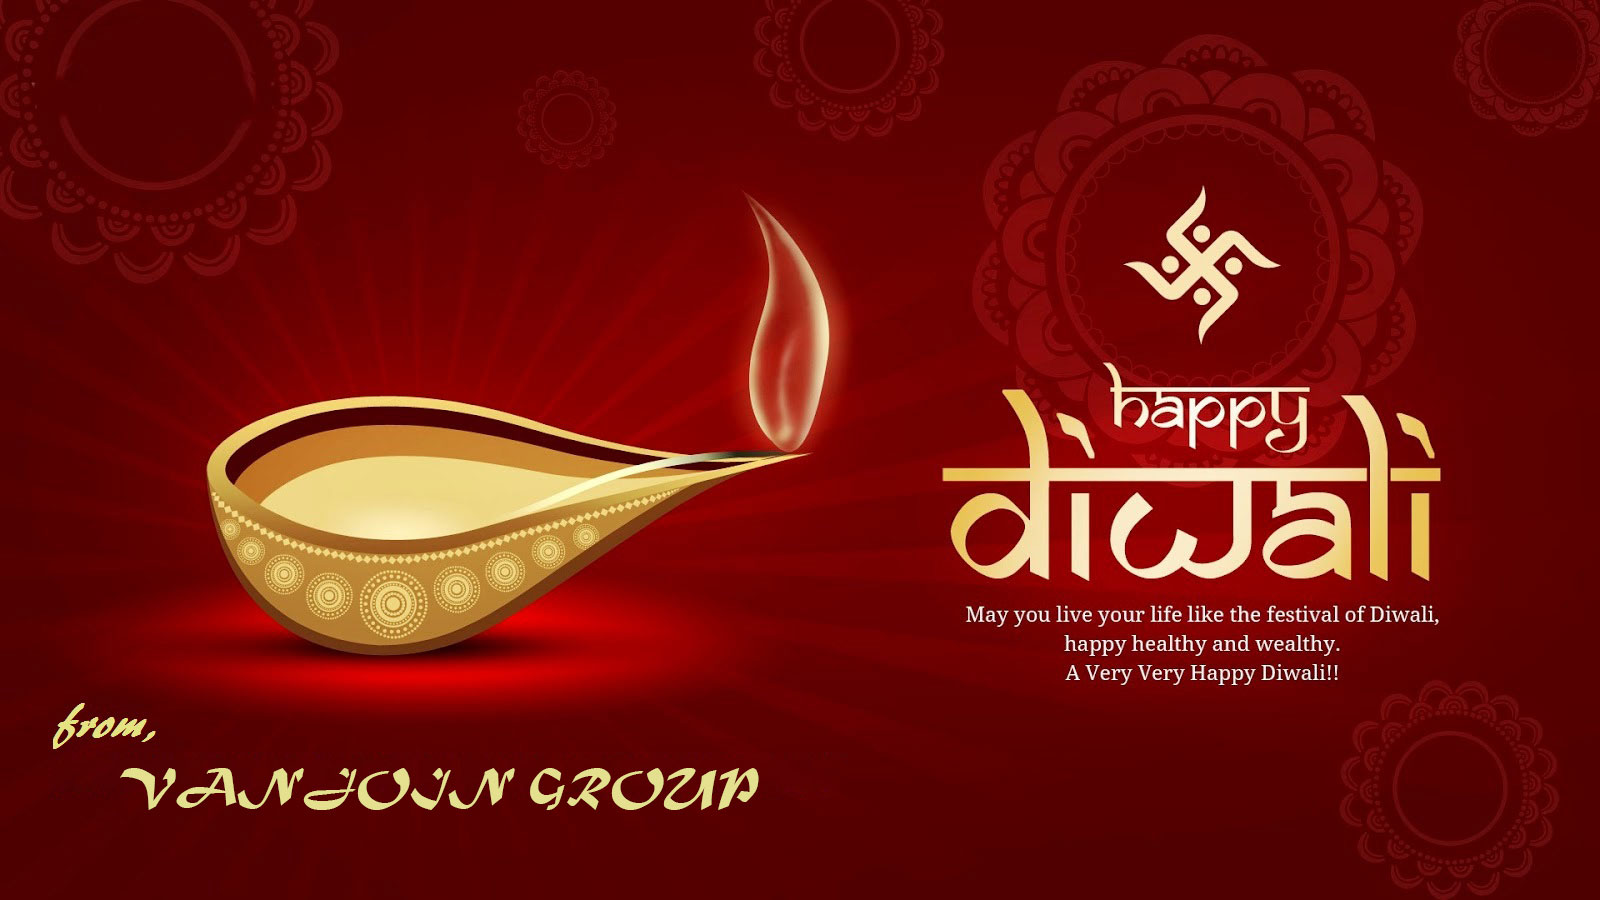 Happy Diwali to all Indian customers